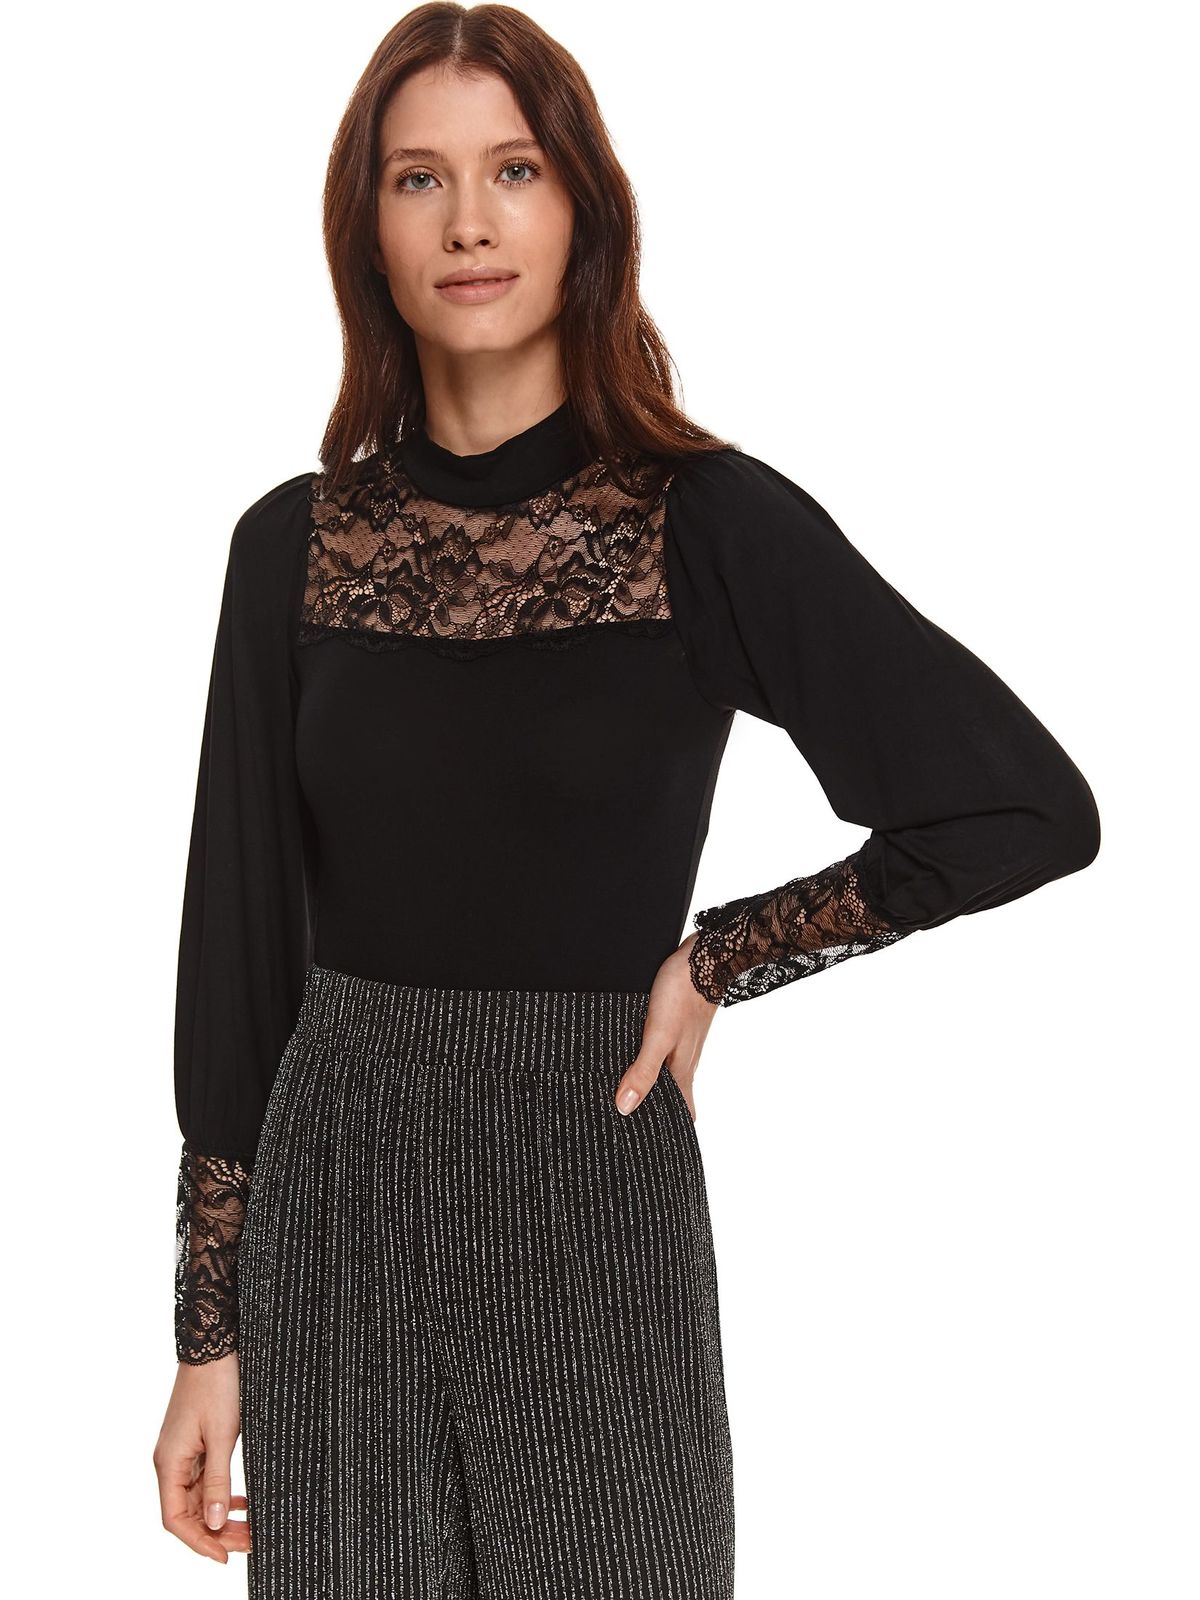 Black sweater with turtle neck with lace details thin fabric